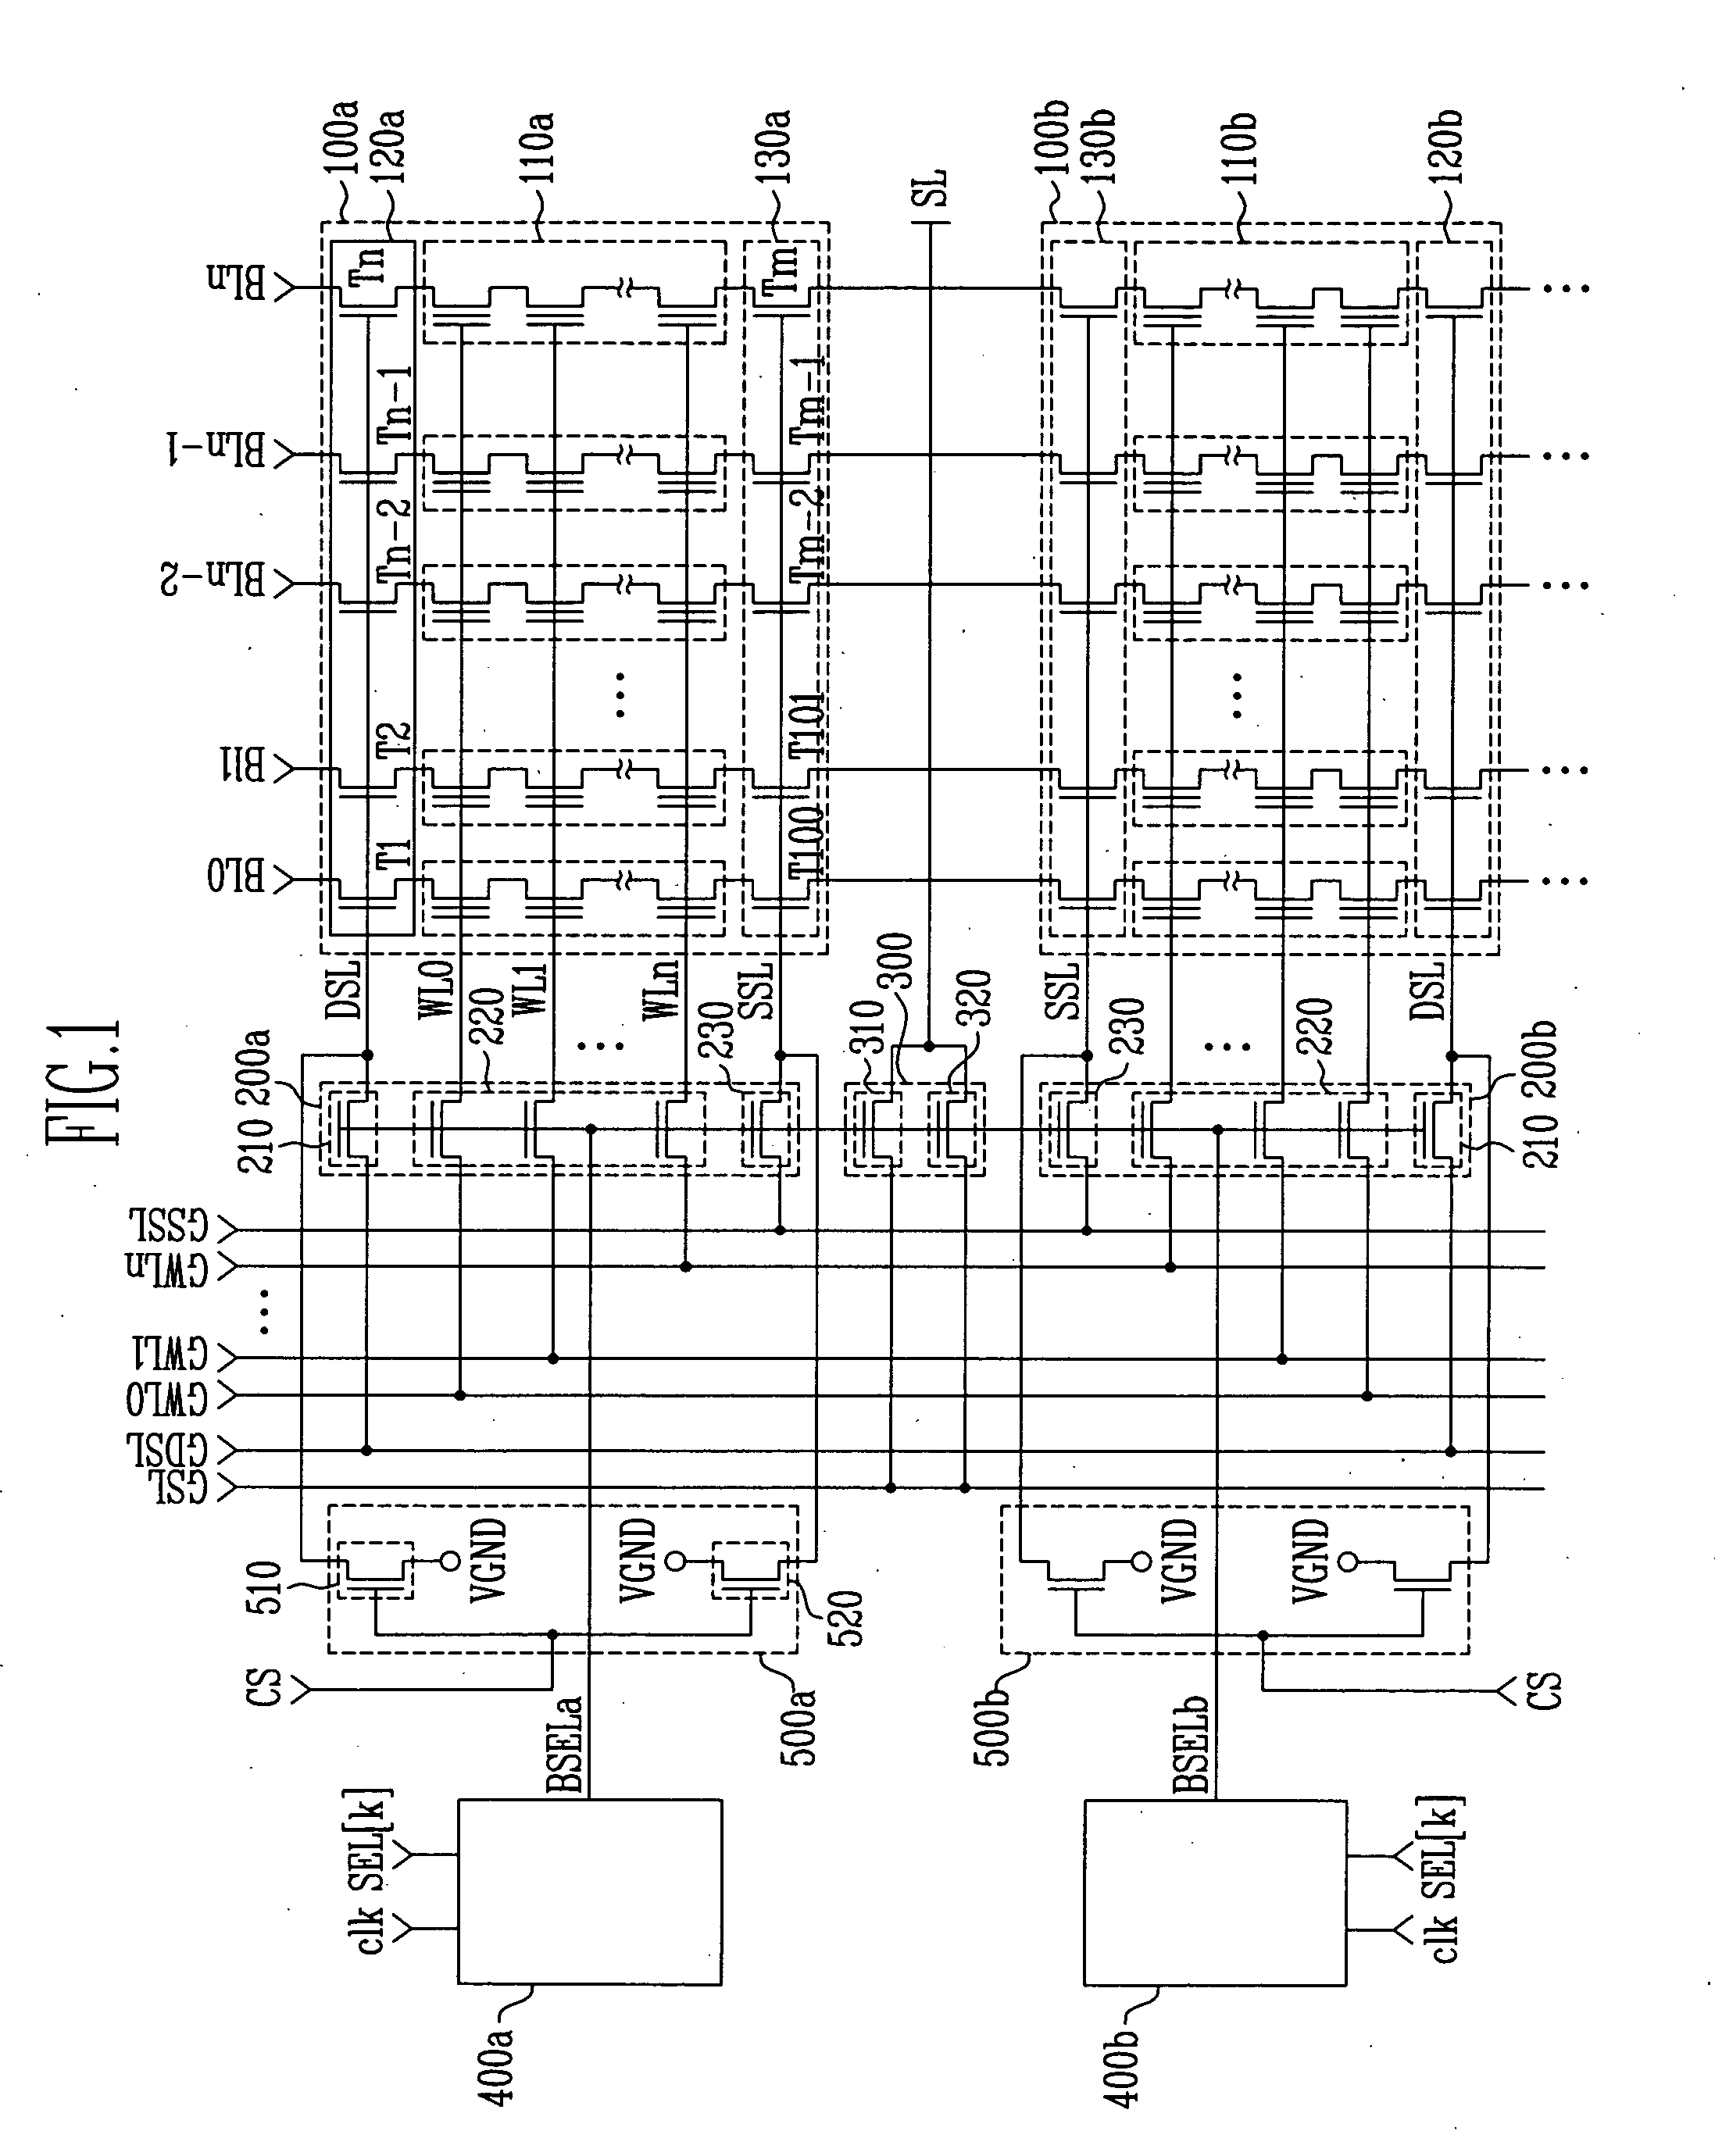 NAND flash memory device and method of programming the same